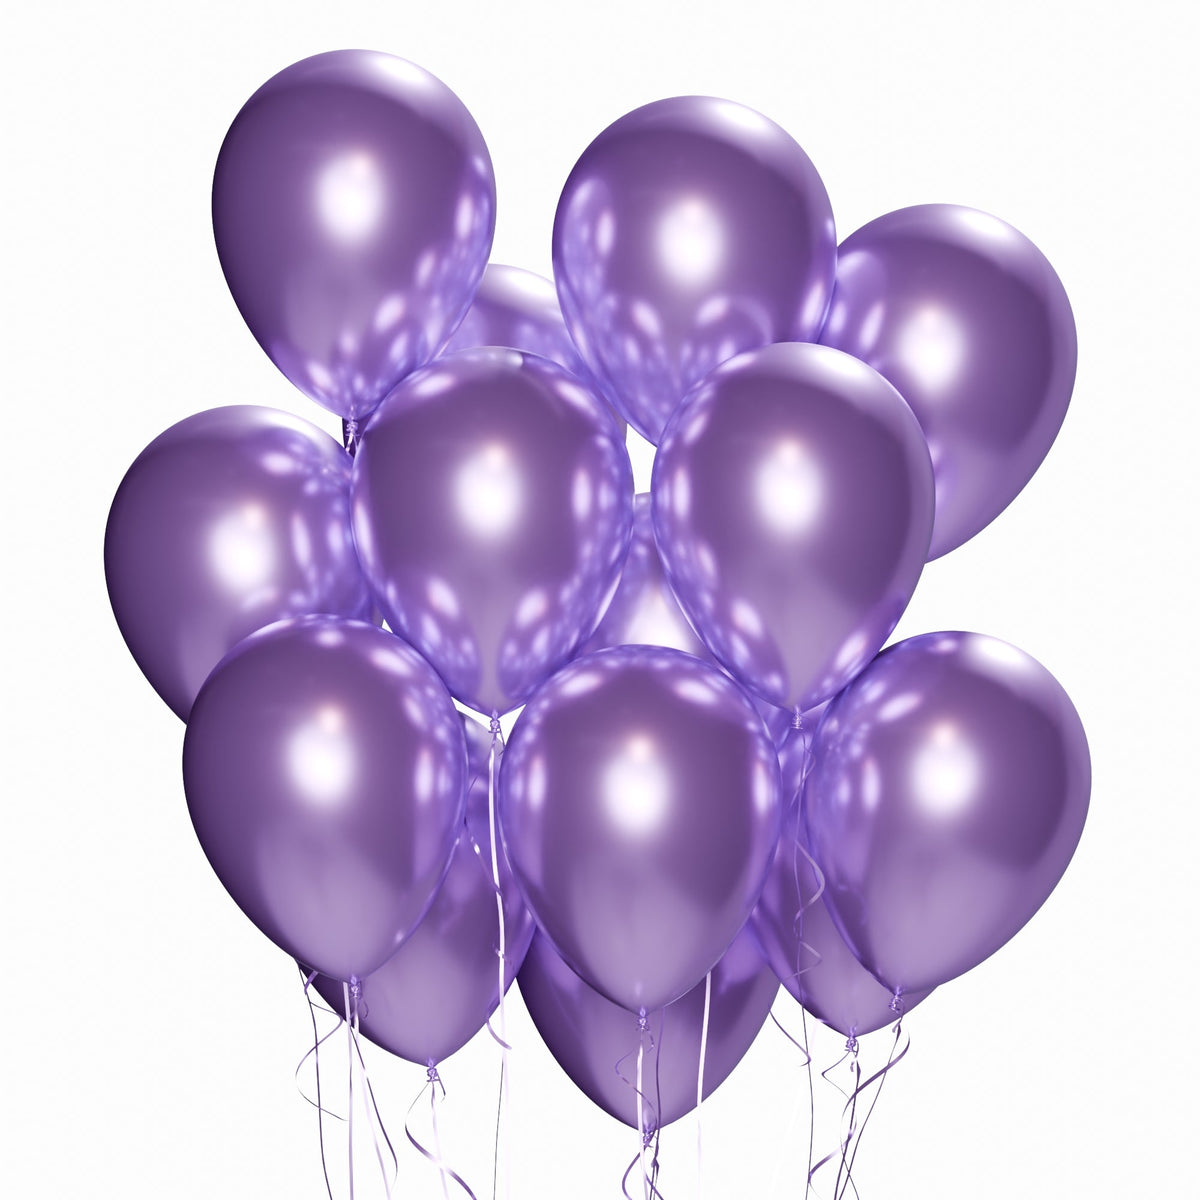 WIDE OCEAN INTERNATIONAL TRADE BEIJING CO., LTD Balloons Purple Latex Balloon 12 Inches, Chrome Collection, 15 Count 810064198533